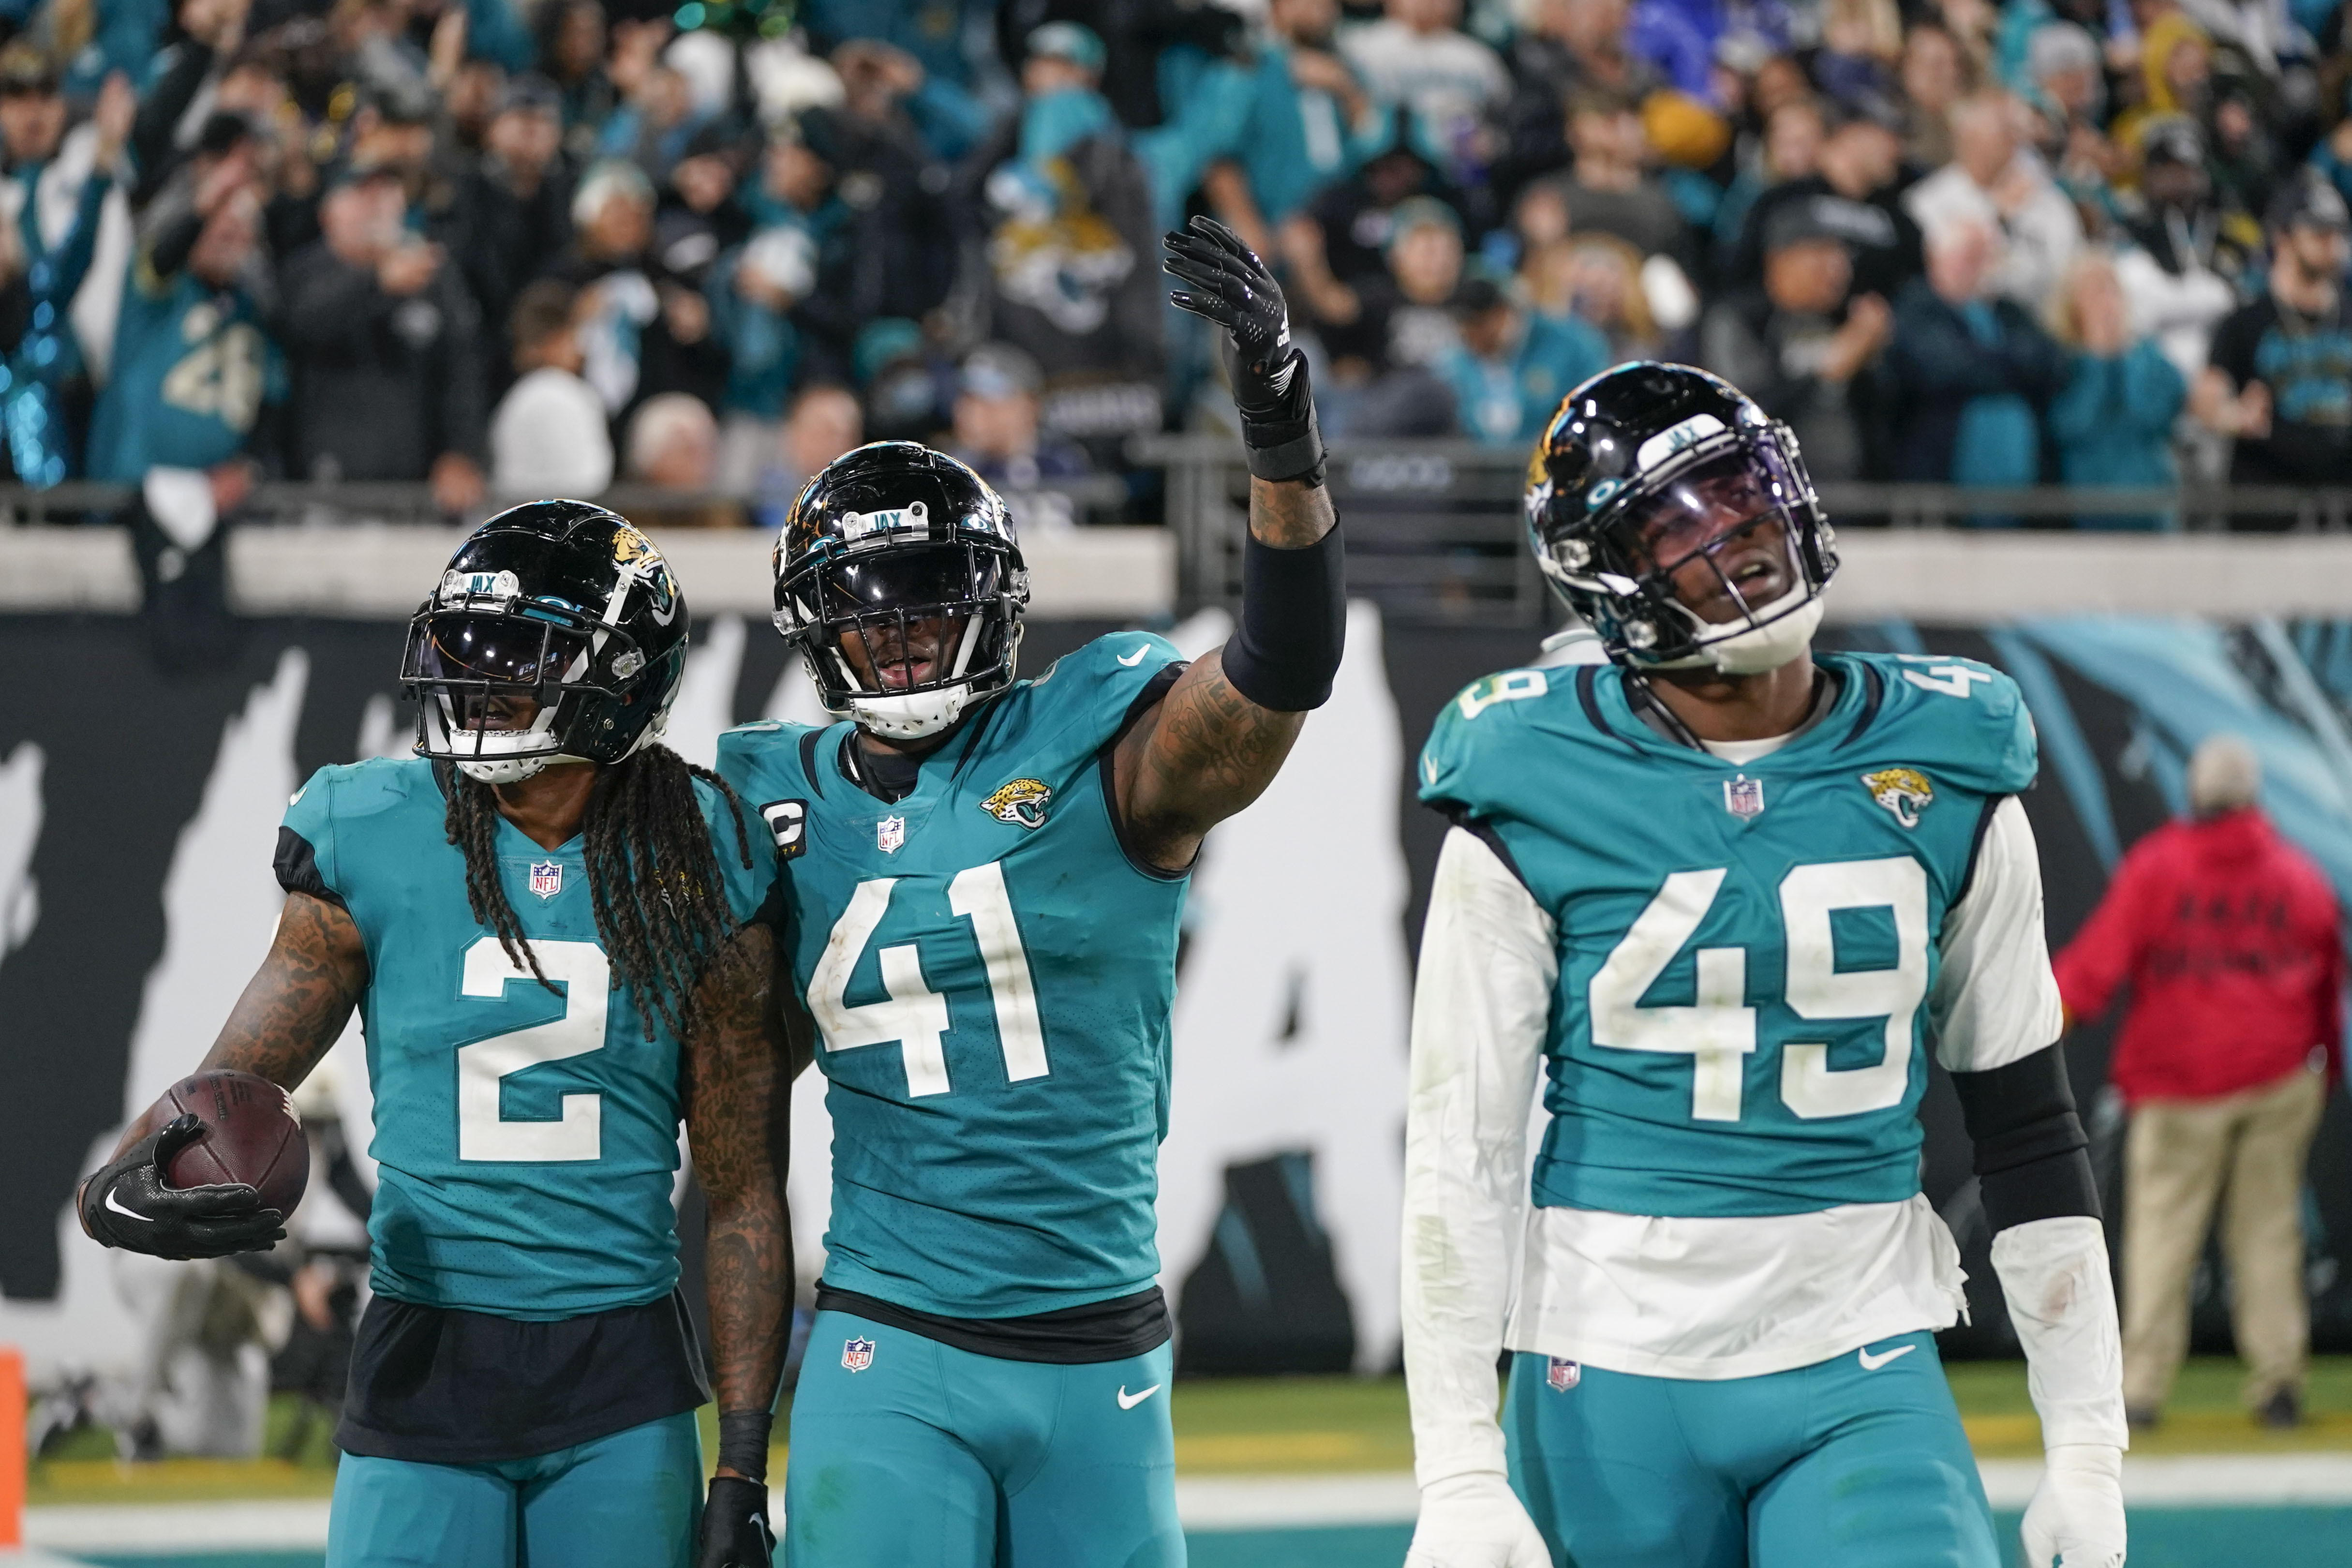 Still more work to do, but quite a season for Jaguars to remember